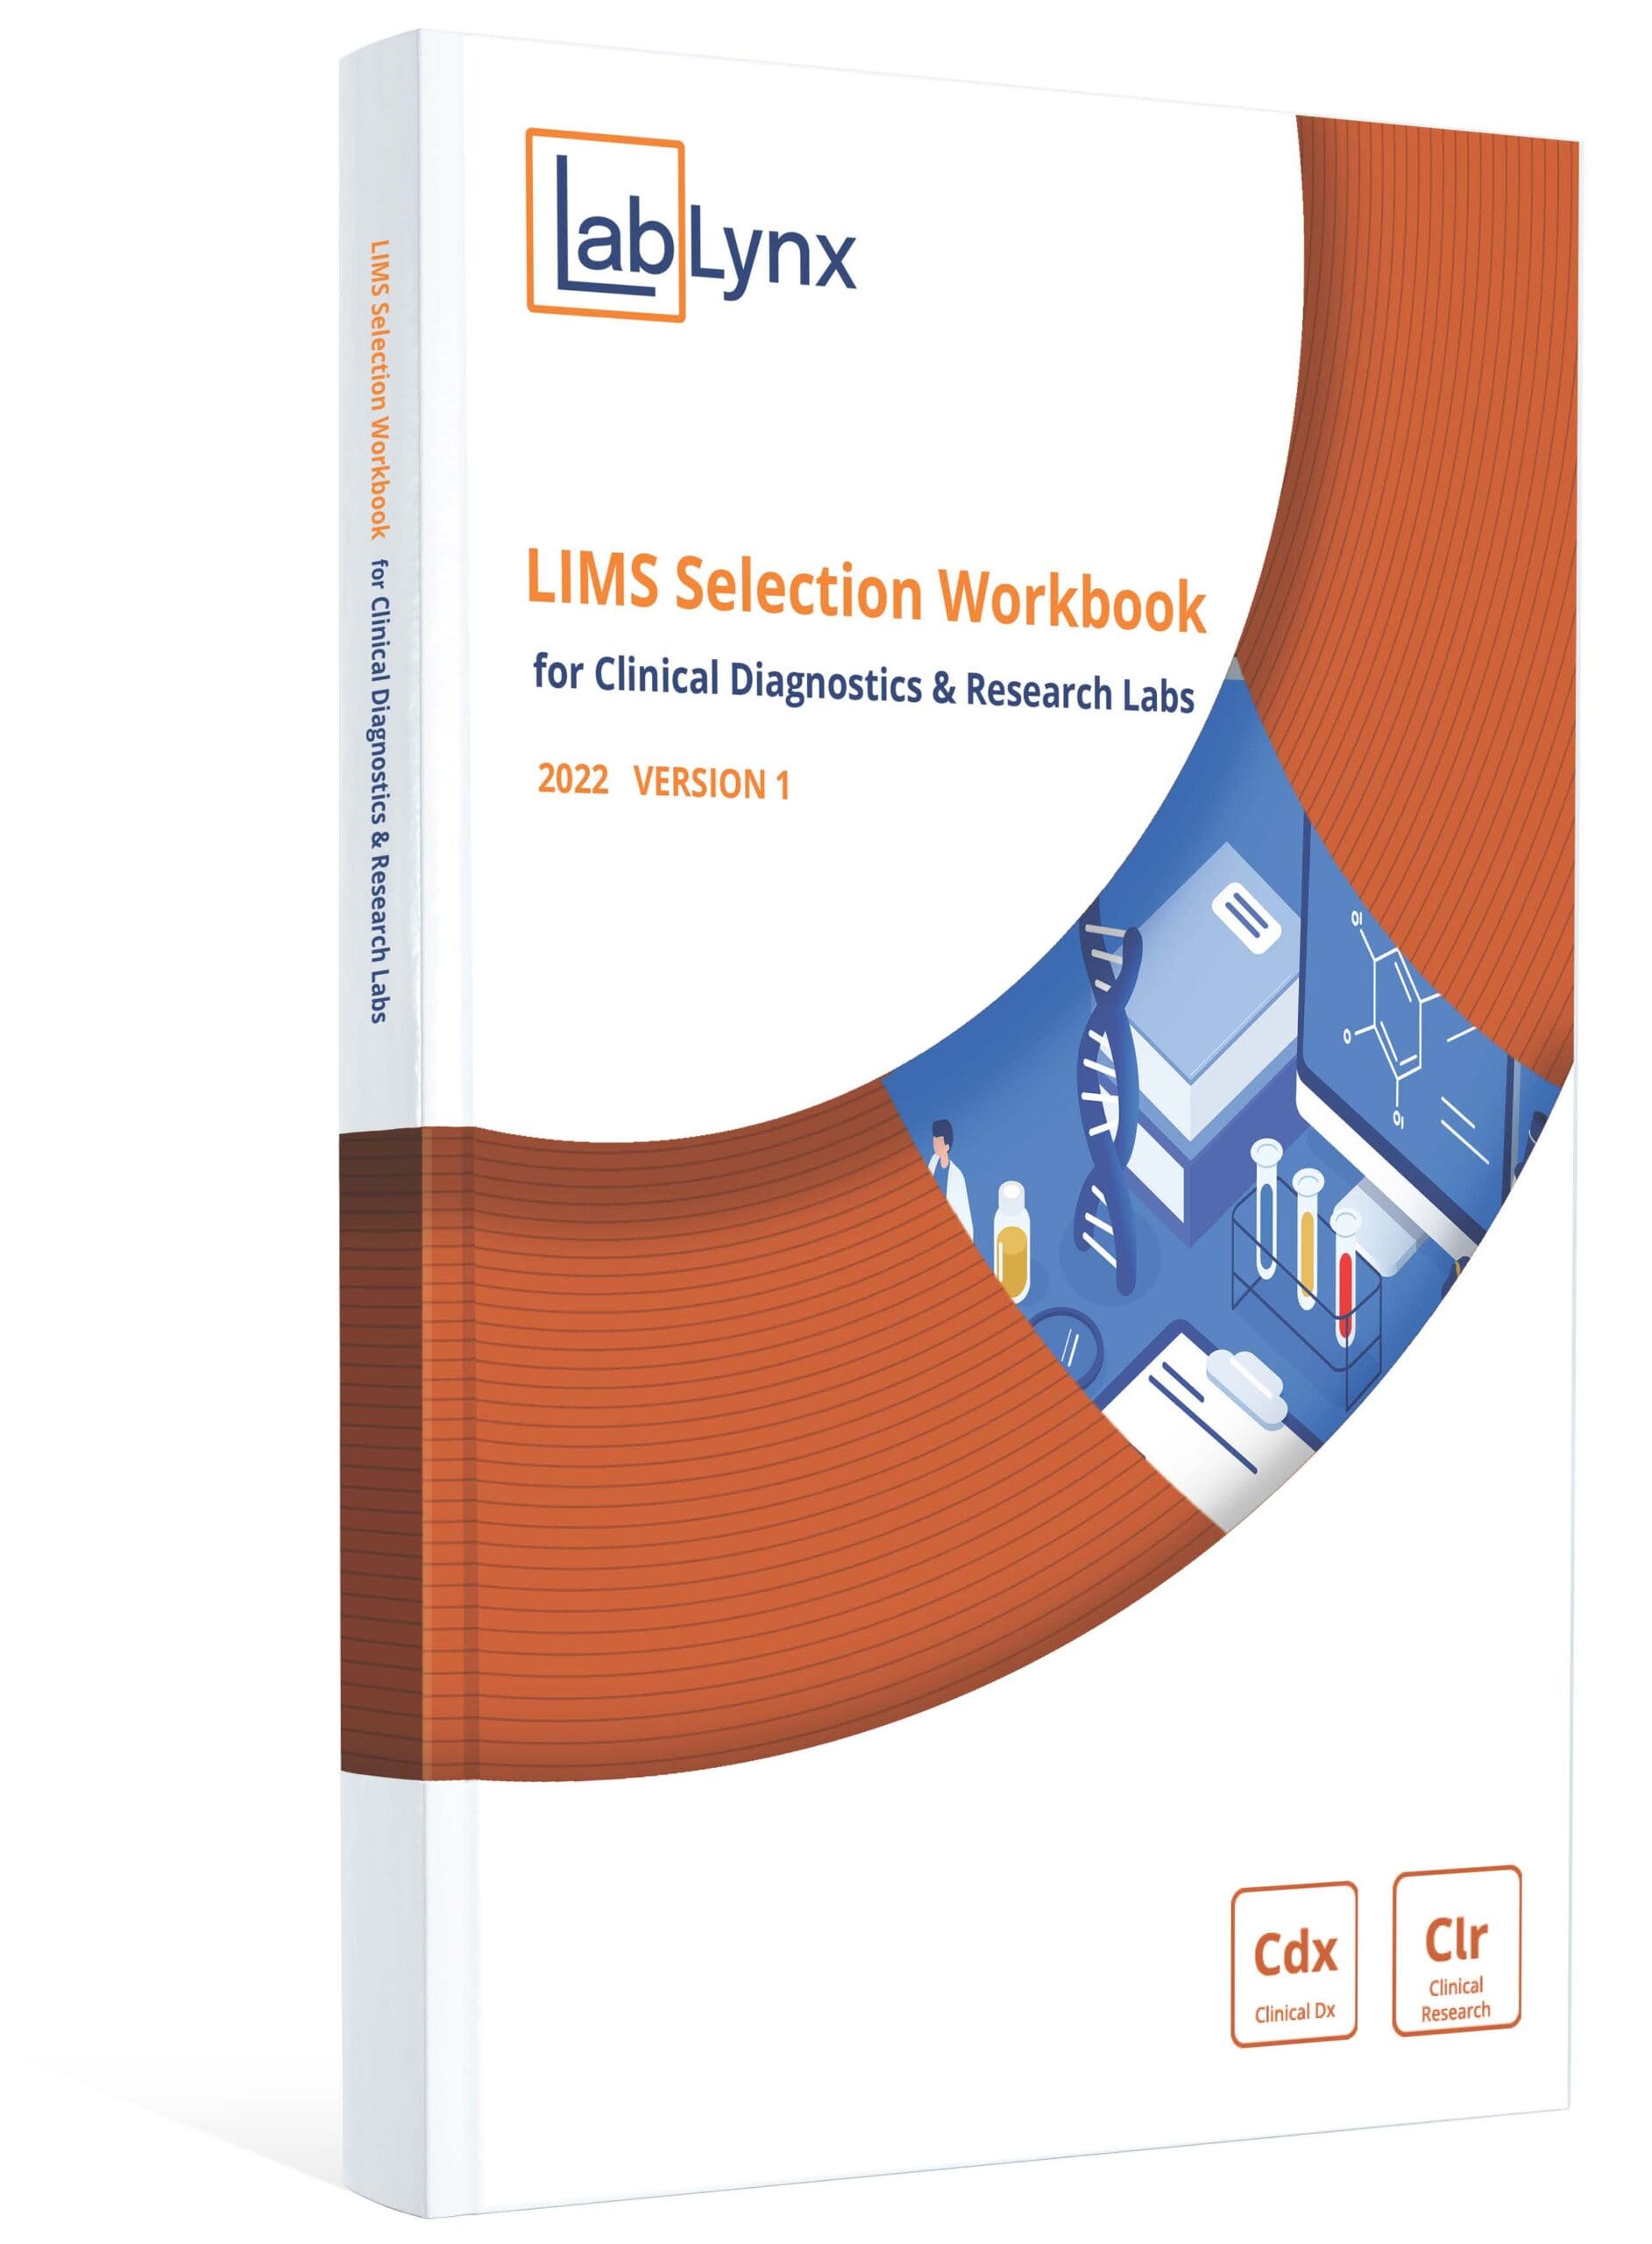 Featured image for “LIMS Selection Workbook for Clinical Diagnostics & Research Labs”